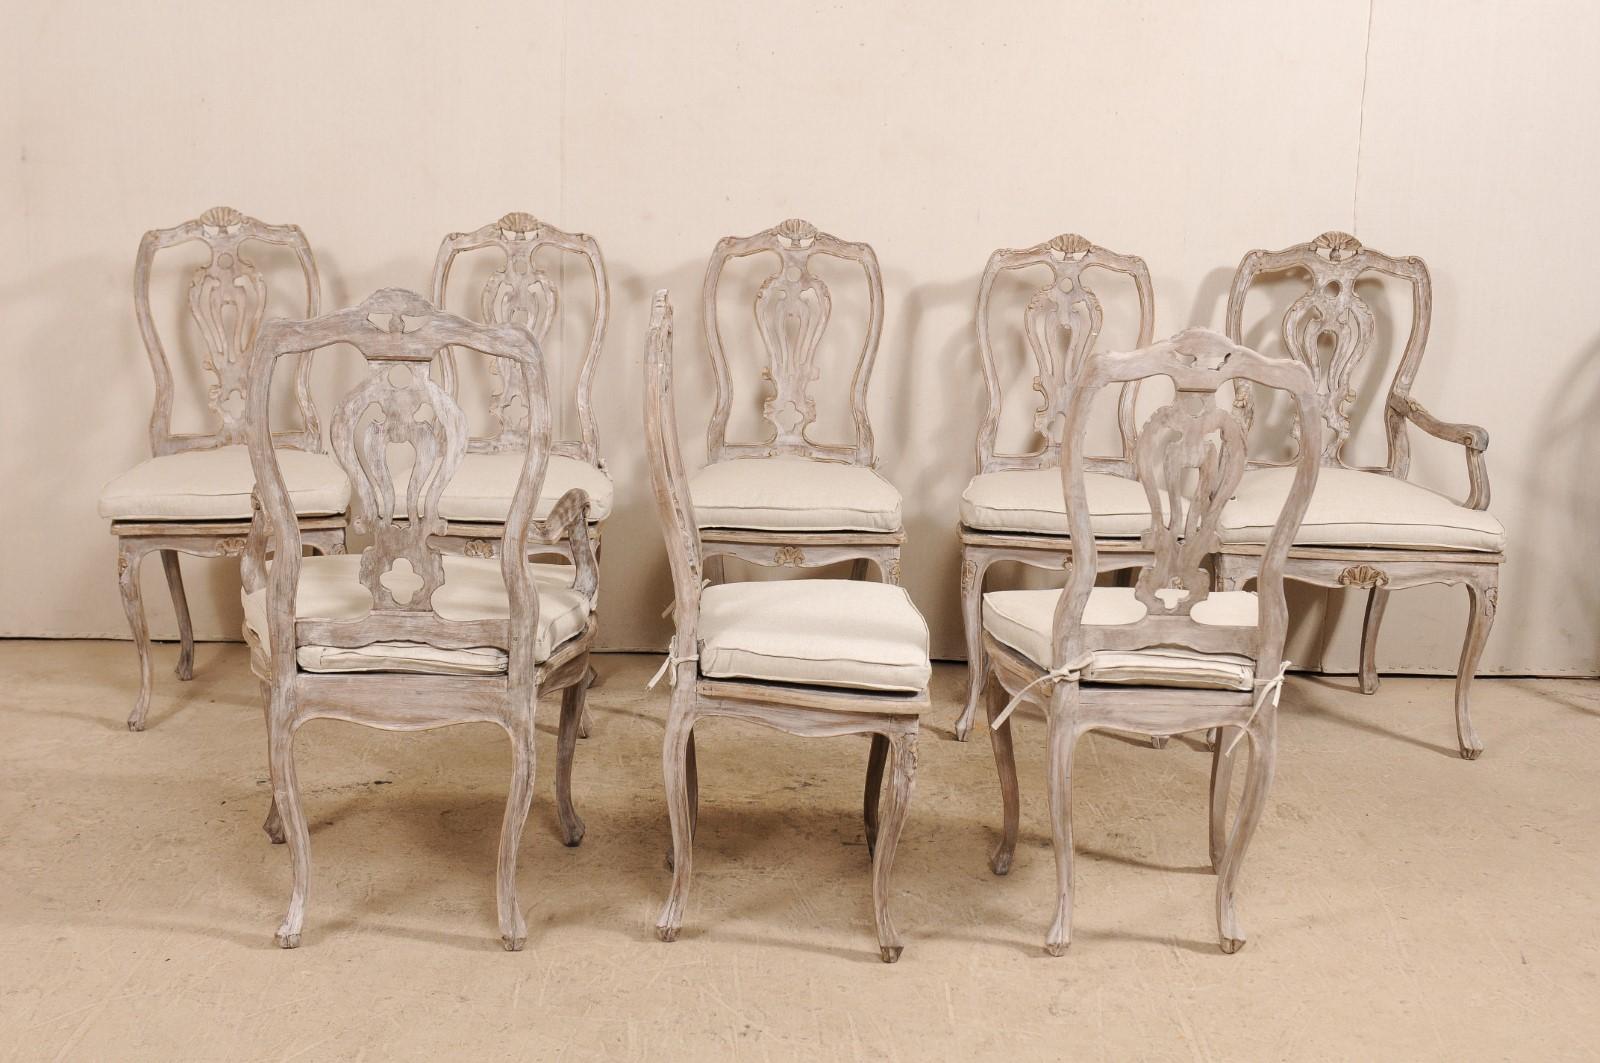 20th Century Set of Eight Lovely Italian Ornately Carved & Pierced-Splat Back Dining Chairs 